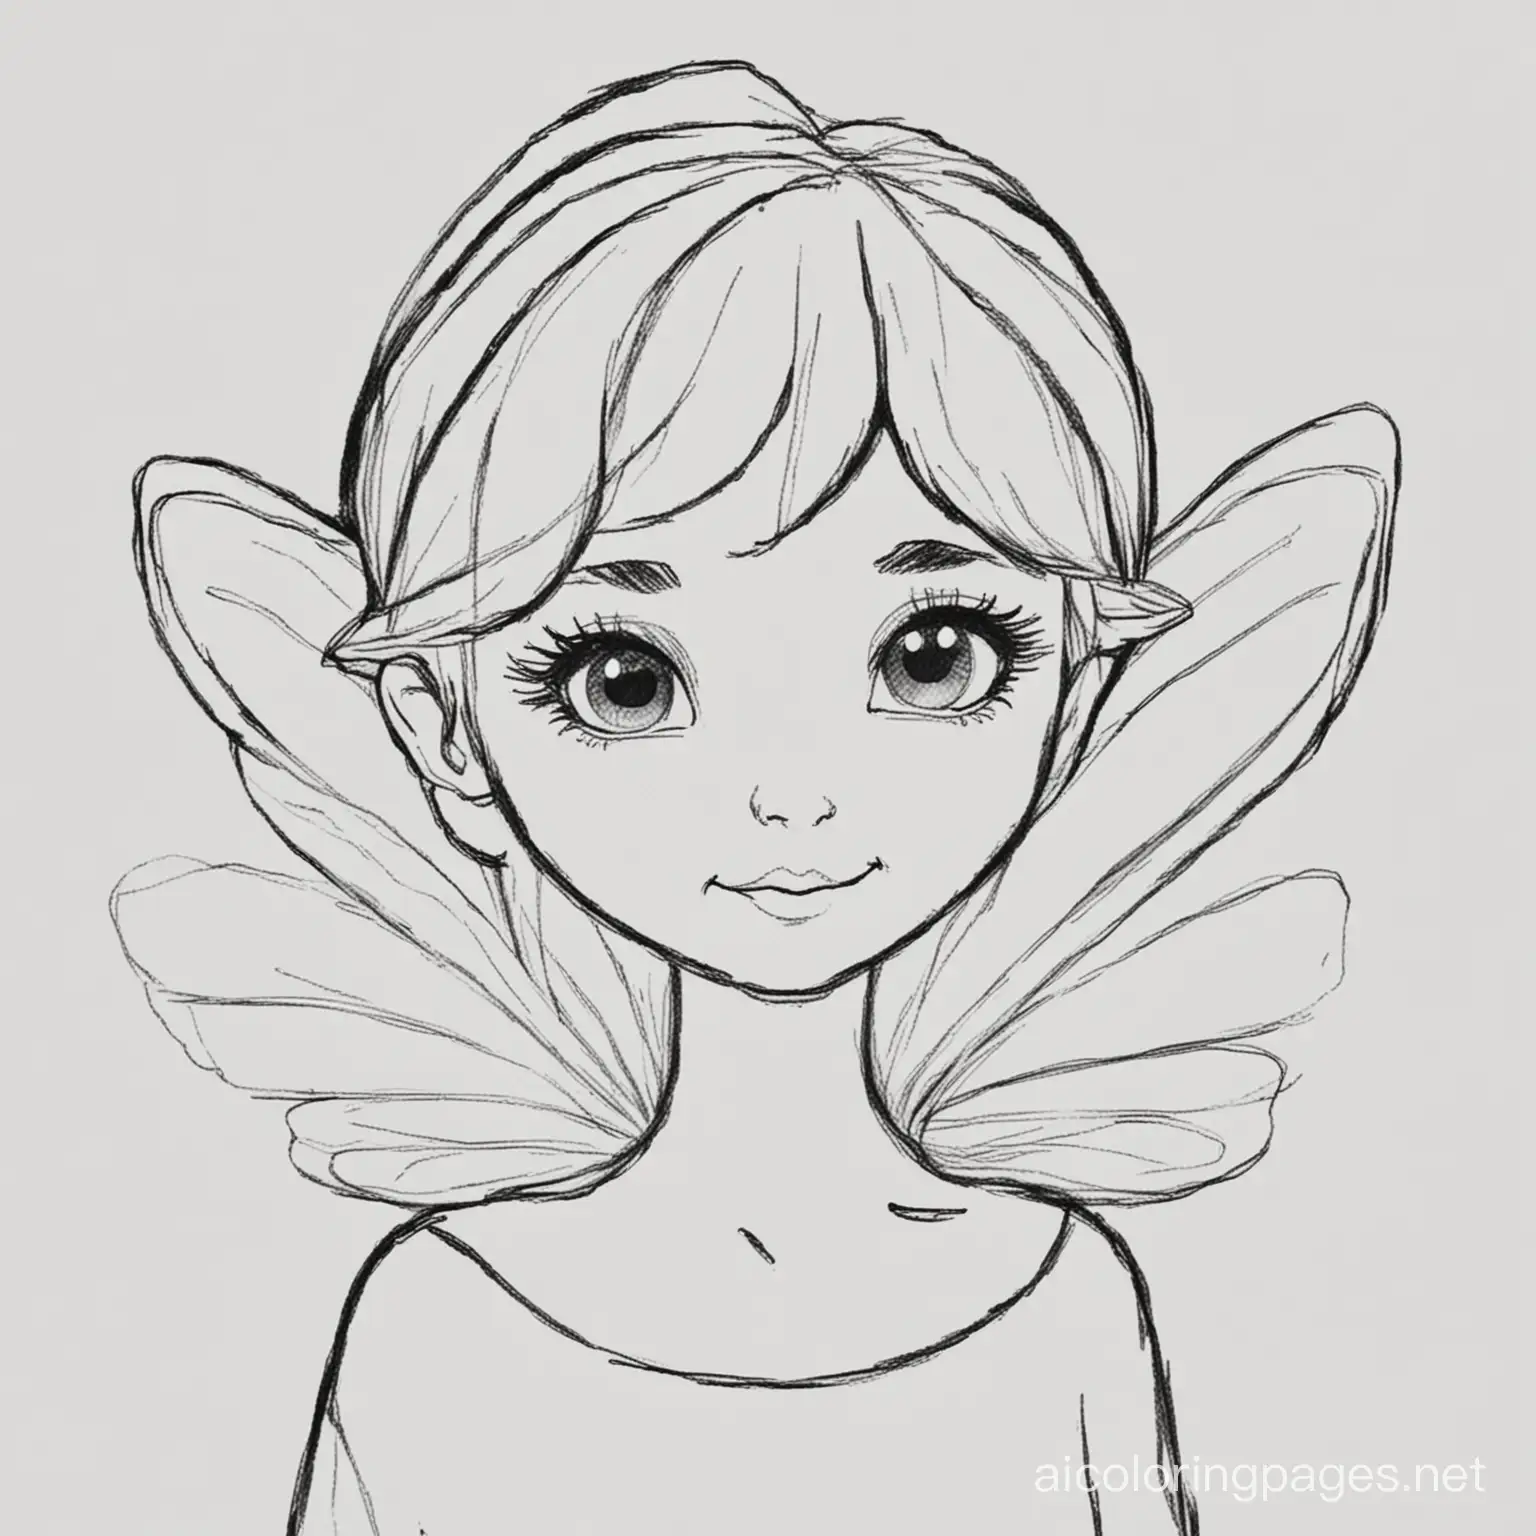 Pixie, Coloring Page, black and white, line art, white background, Simplicity, Ample White Space. The background of the coloring page is plain white to make it easy for young children to color within the lines. The outlines of all the subjects are easy to distinguish, making it simple for kids to color without too much difficulty